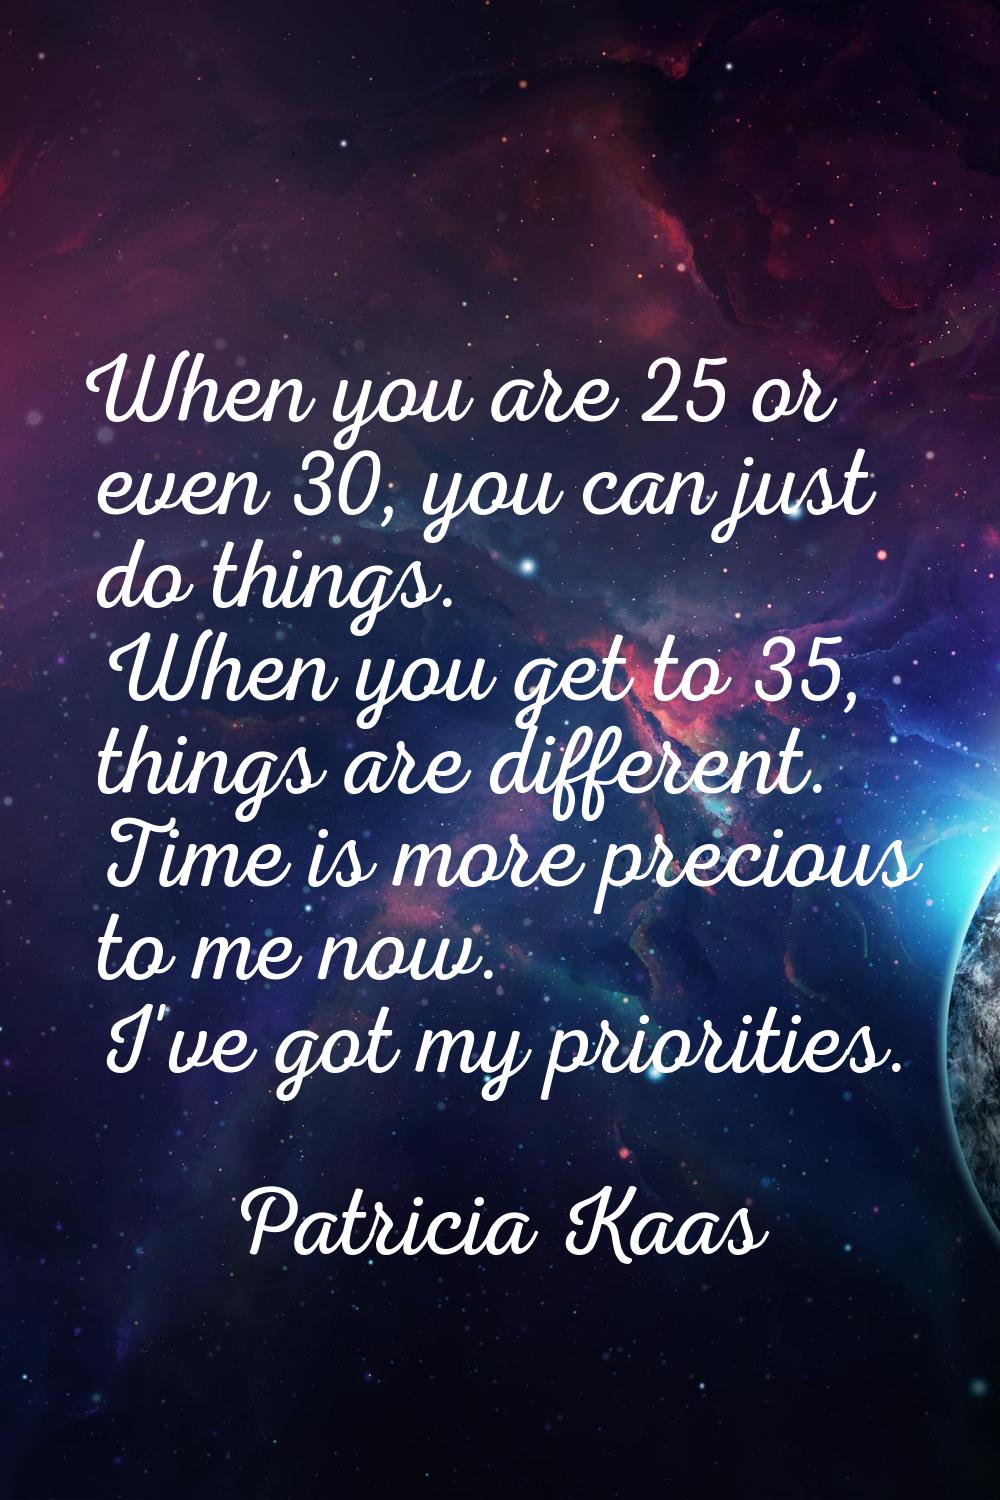 When you are 25 or even 30, you can just do things. When you get to 35, things are different. Time 